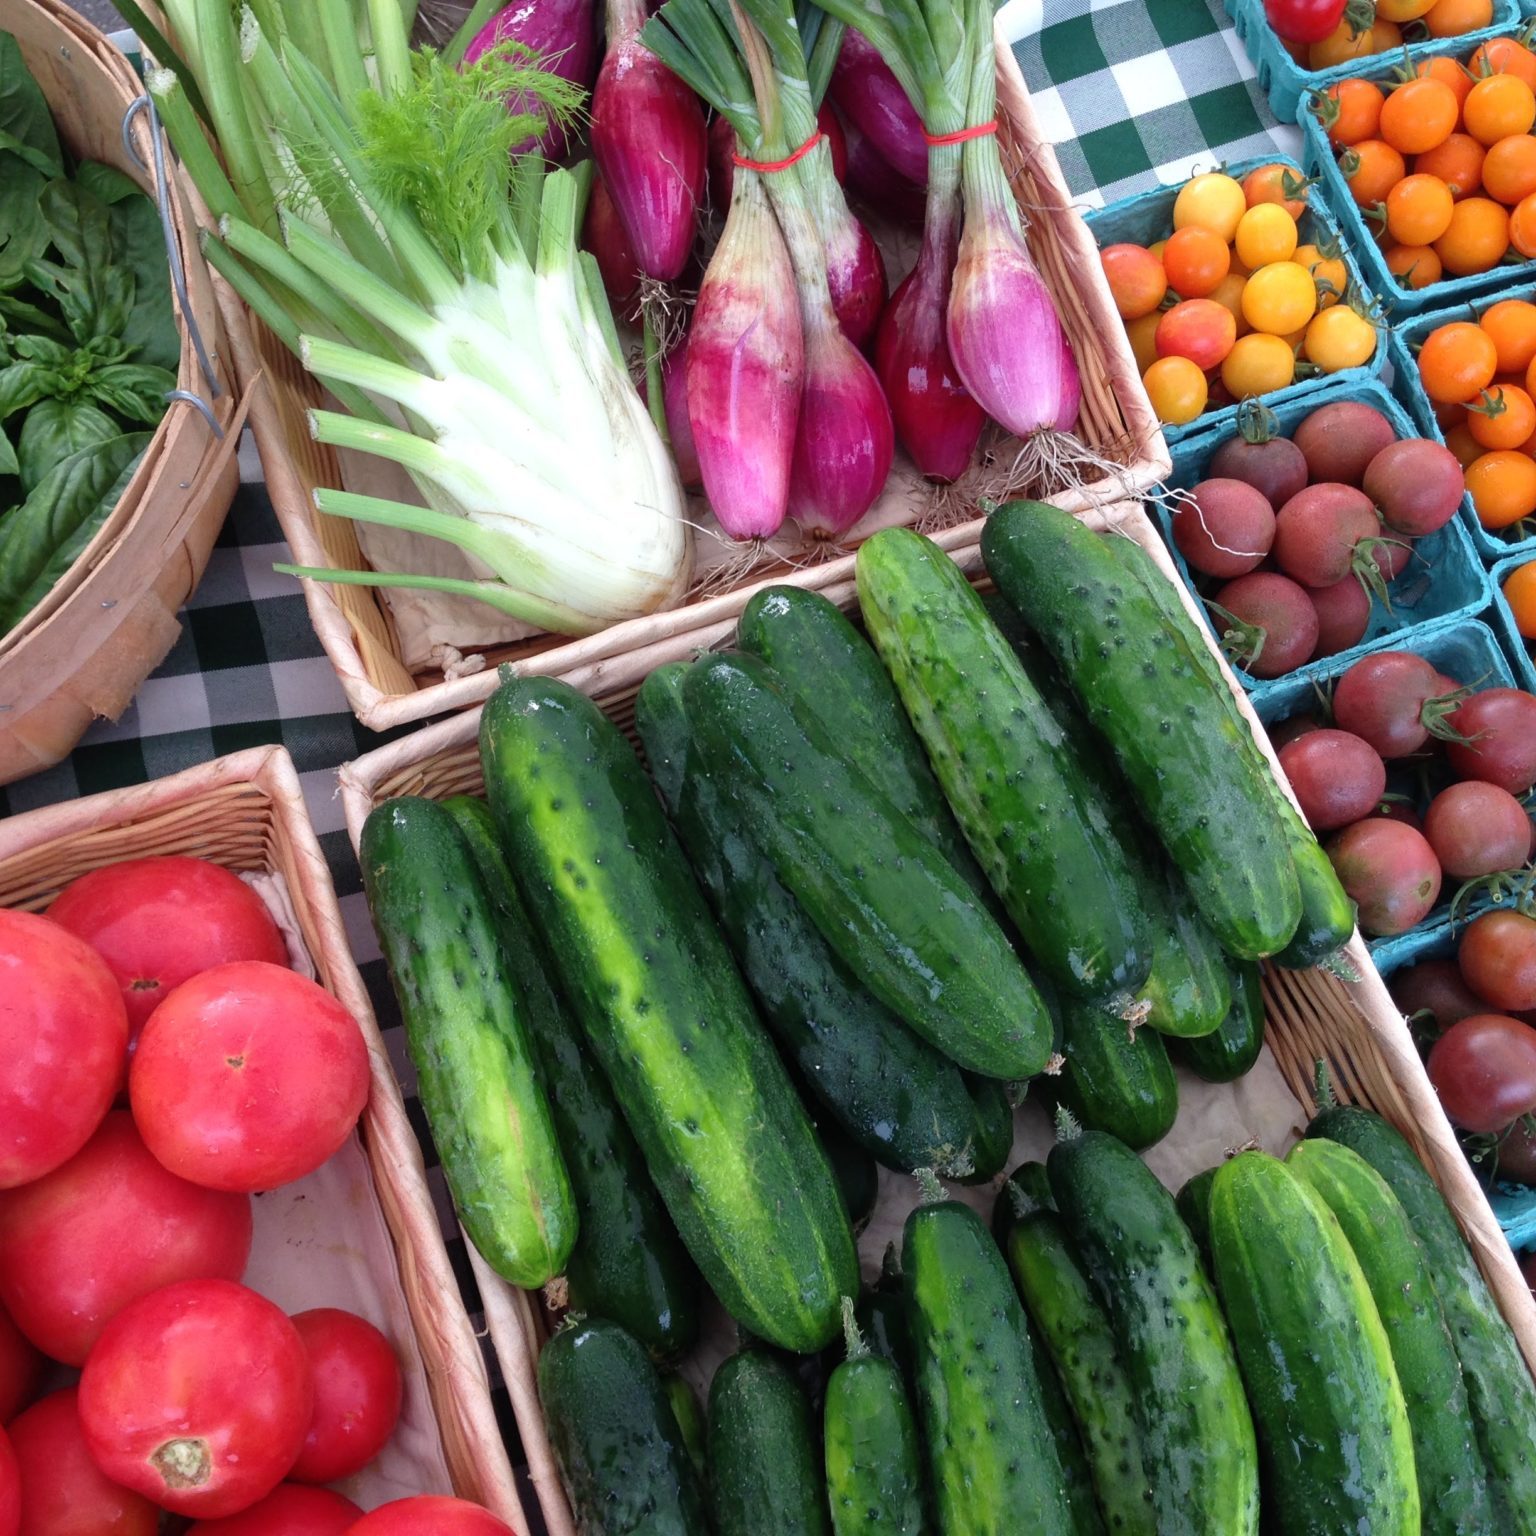 spread of vegetables for sale at a farmers market